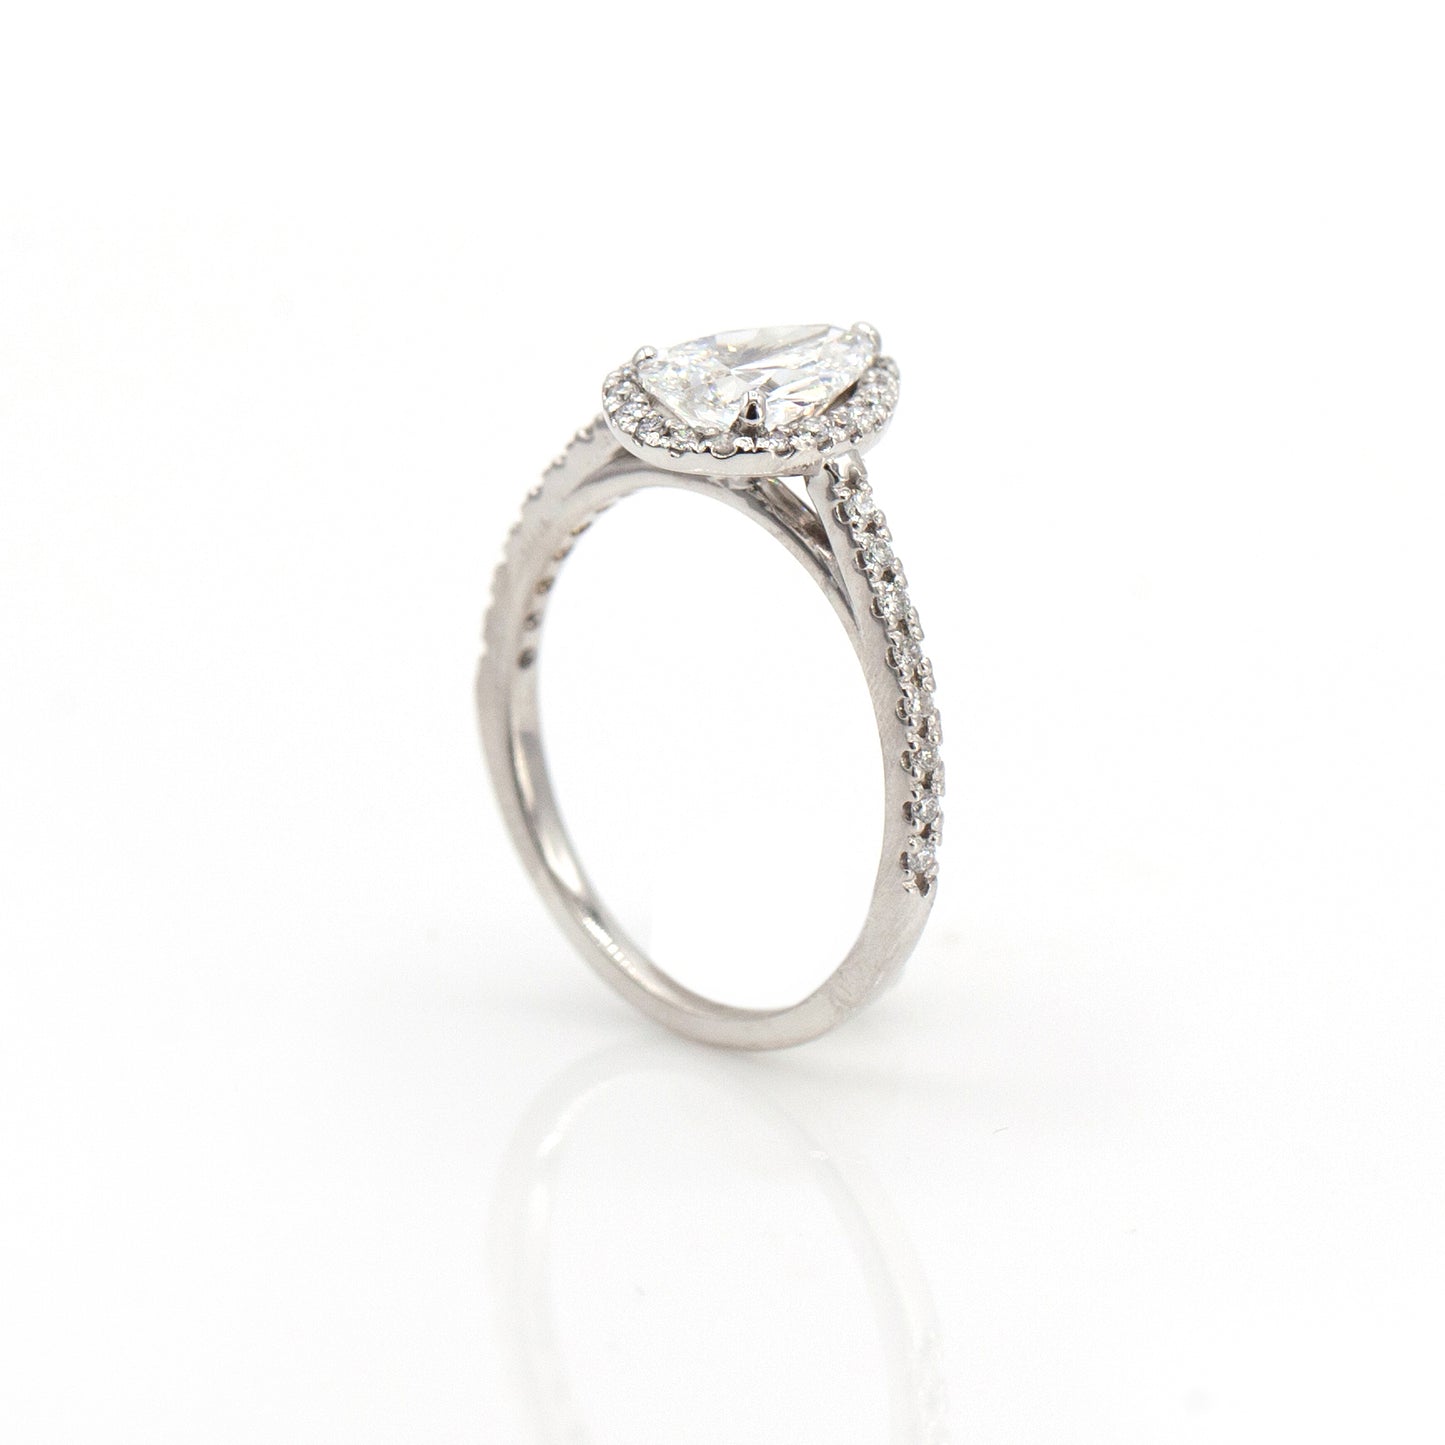 14K 1.07ct Lab-Created Pear-Shaped Diamond Engagement Ring